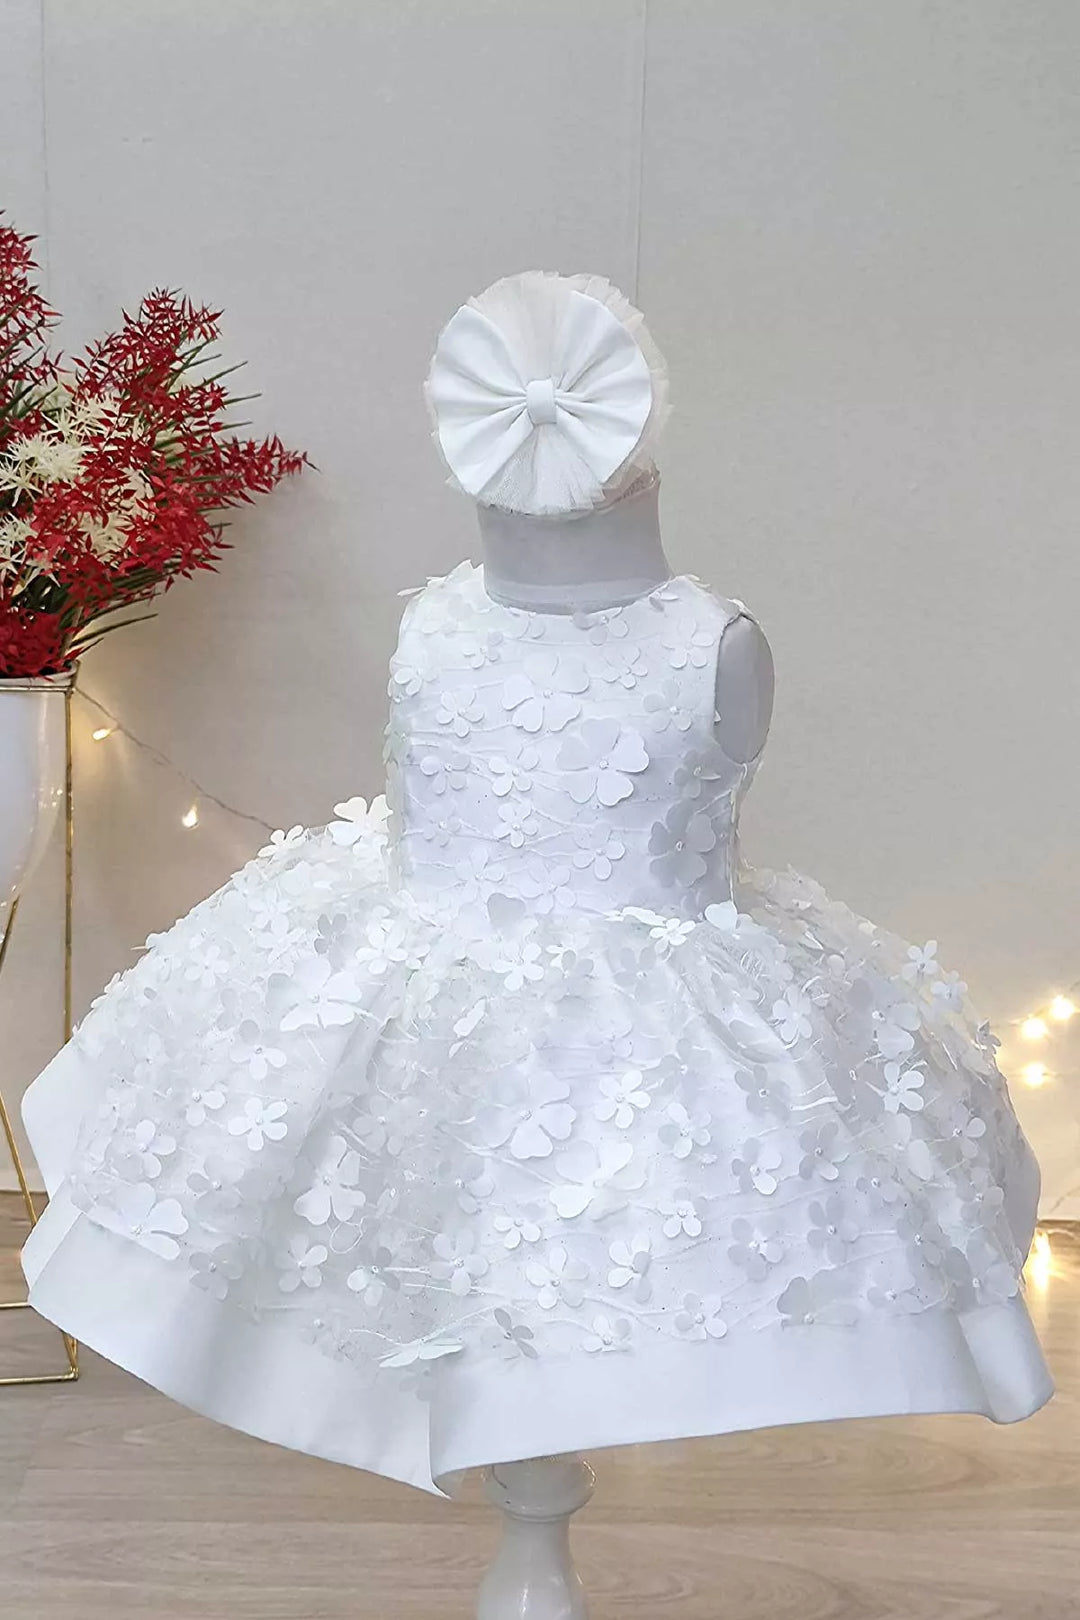 A white snow themed floral sleeveless dress that has 3D flowers and puffy skirt